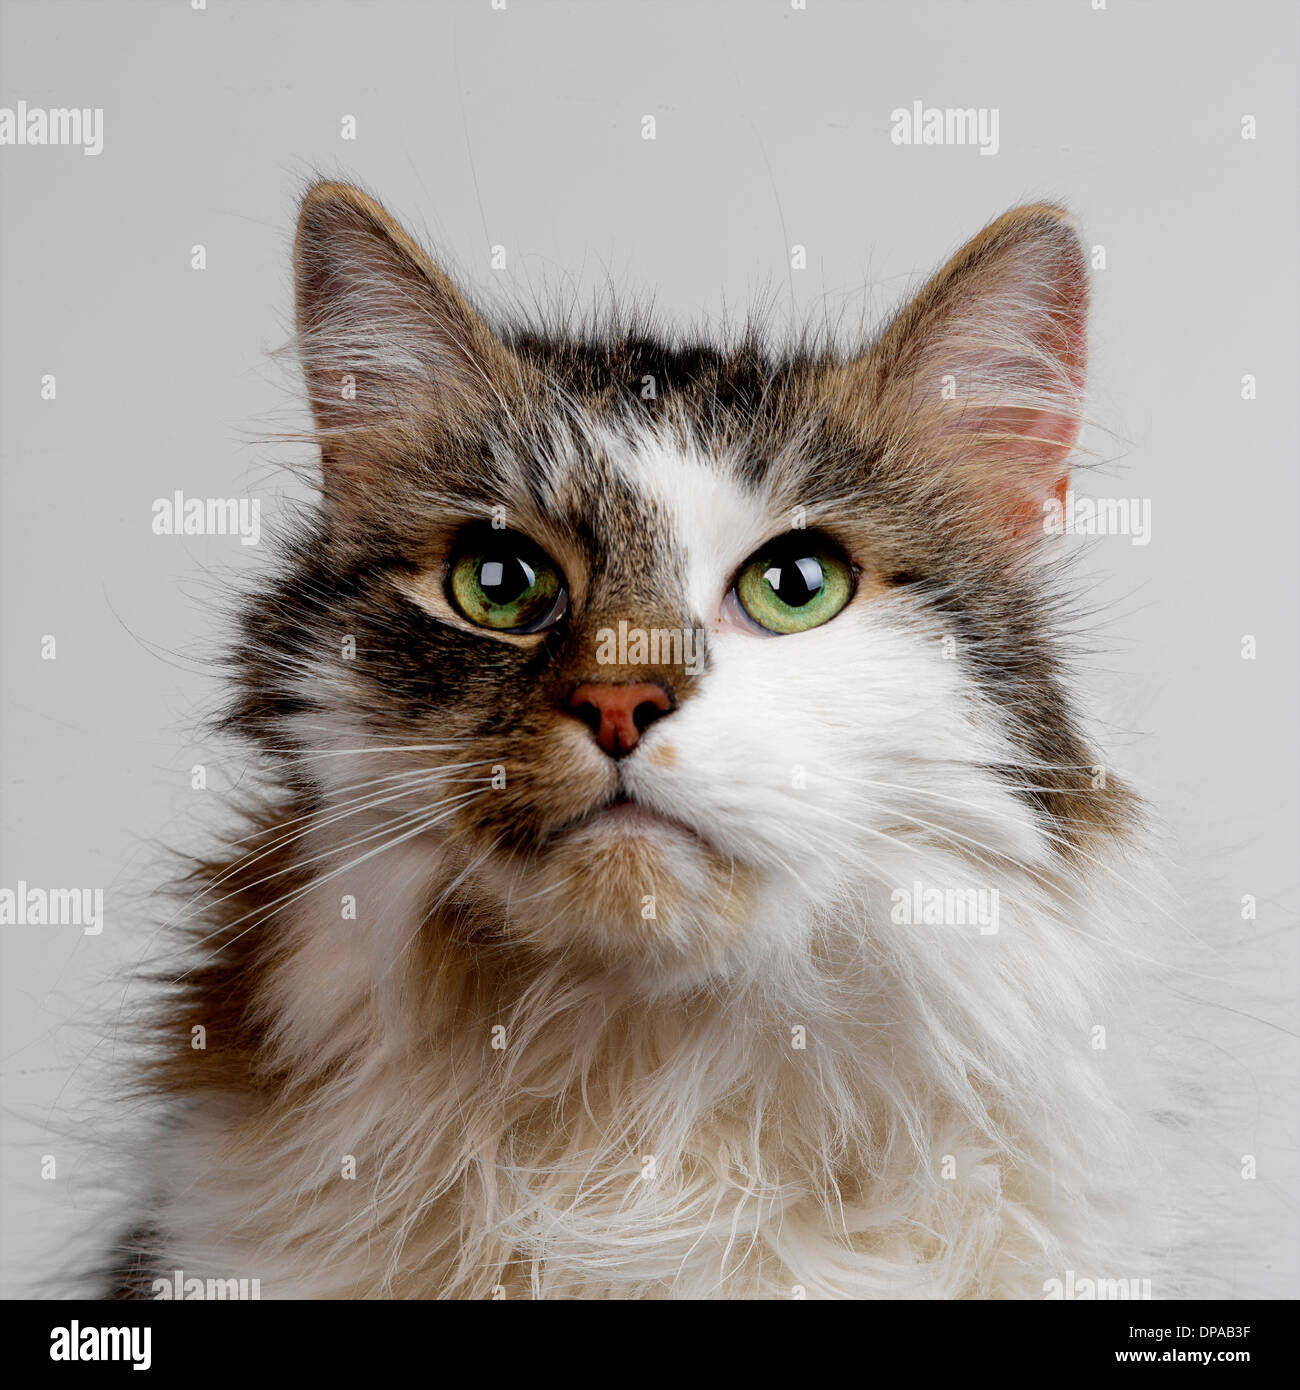 Tabby and white fluffy cat Stock Photo